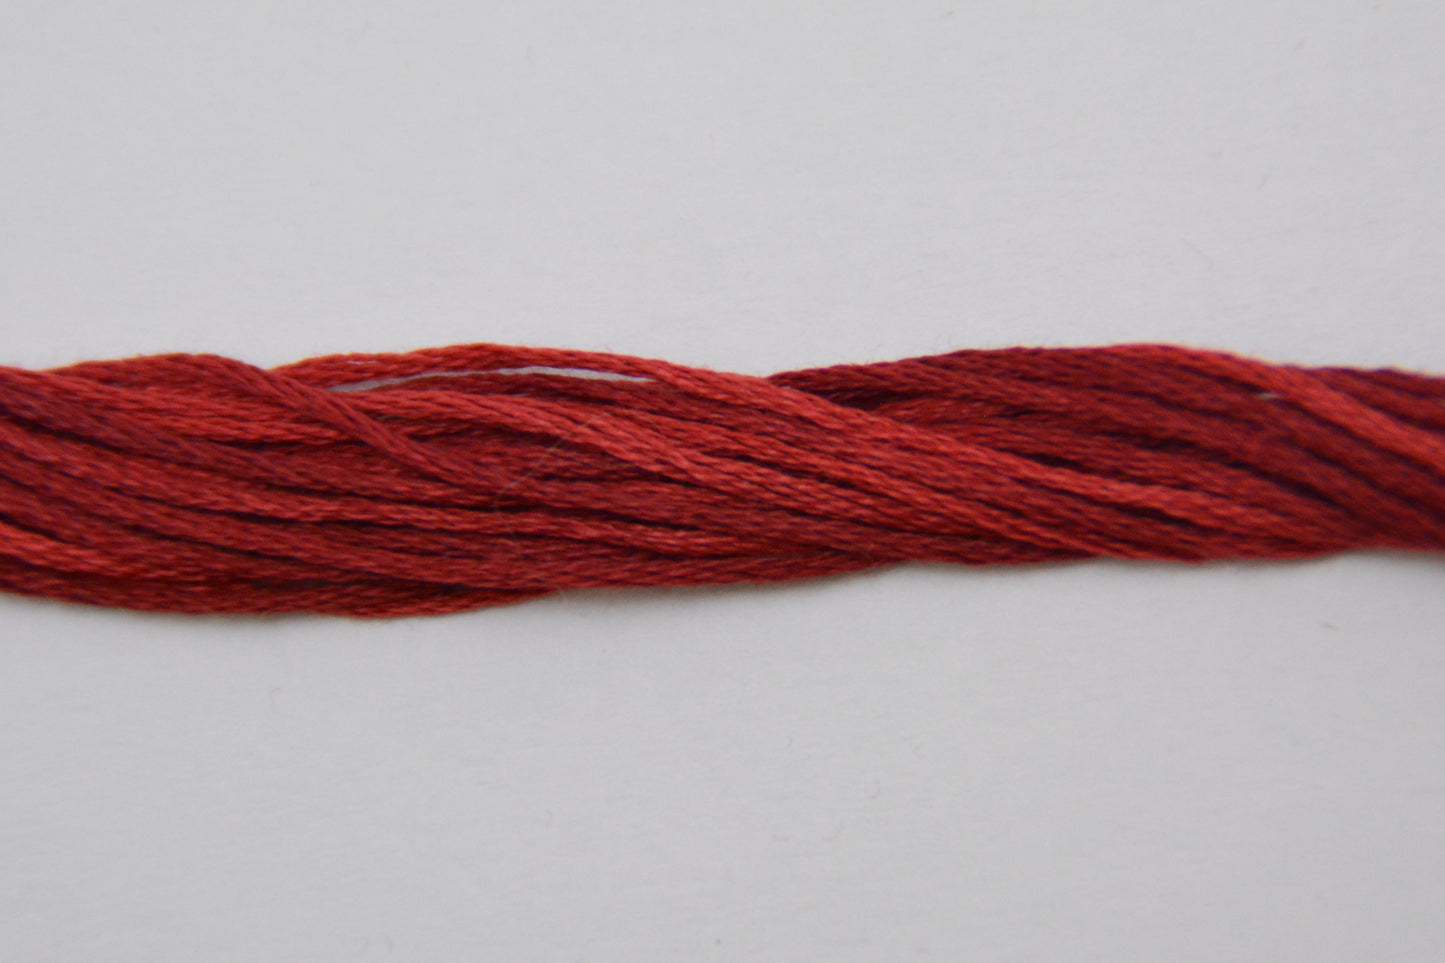 Cayenne 2259 Weeks Dye Works 6-Strand Hand-Dyed Embroidery Floss